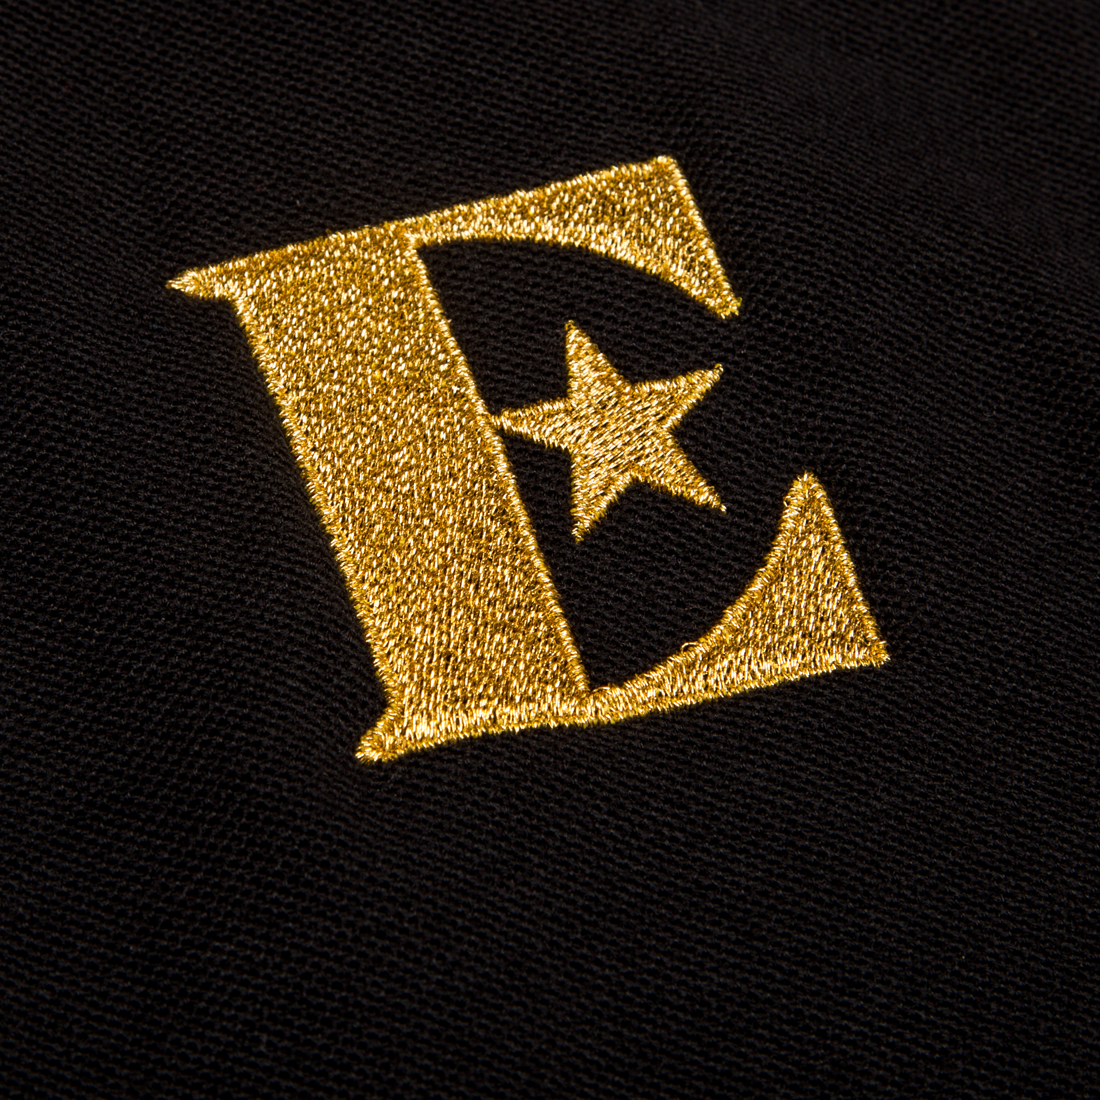 Gold Embroidered Polo Shirt